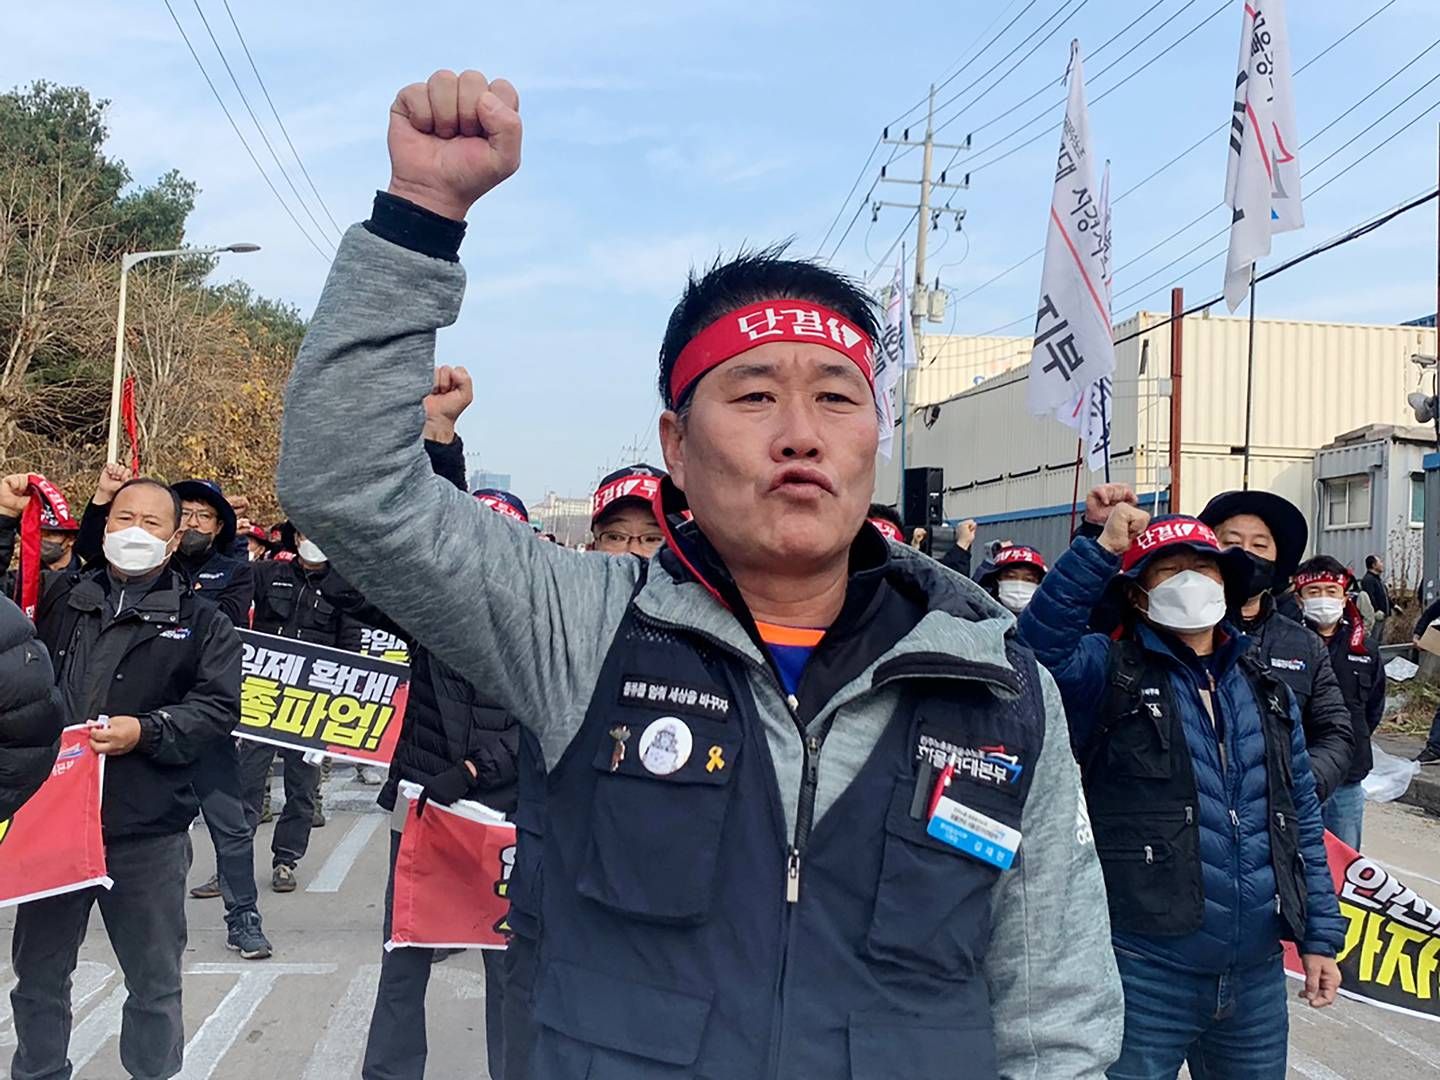 Labor union Cargo Truckers Solidarity Union estimates that around 11,000 of its members are participating in the latest strike. | Photo: Ju-Min Park/Reuters/Ritzau Scanpix